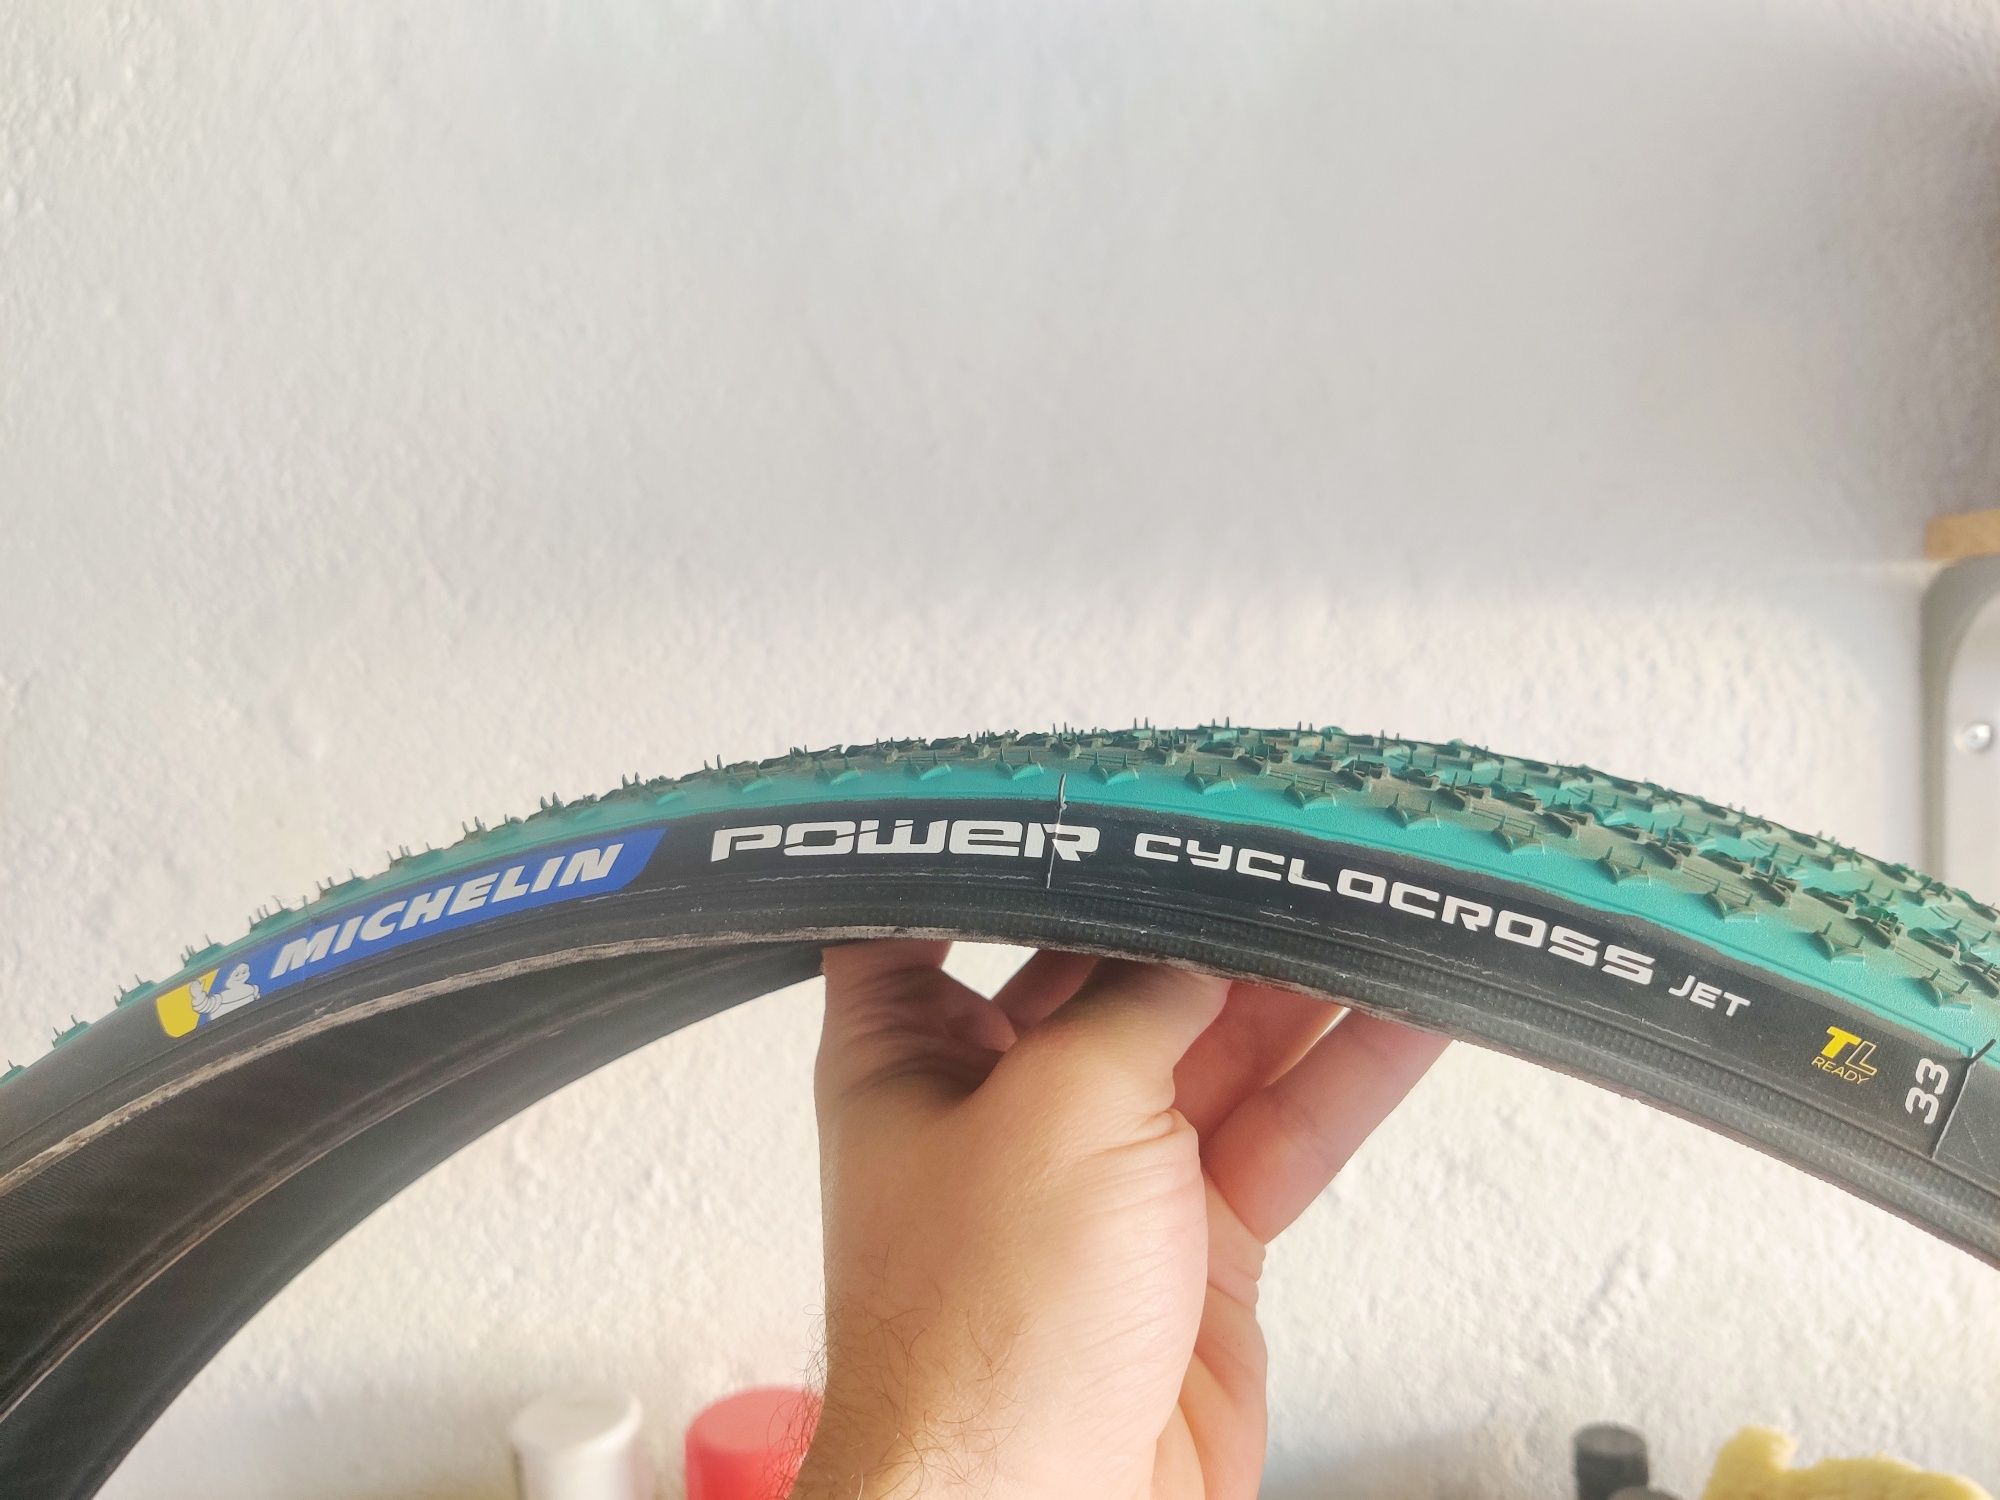 Pneus Michelin Power Cyclocross Jet TLR 700x33c Tubeless Ready